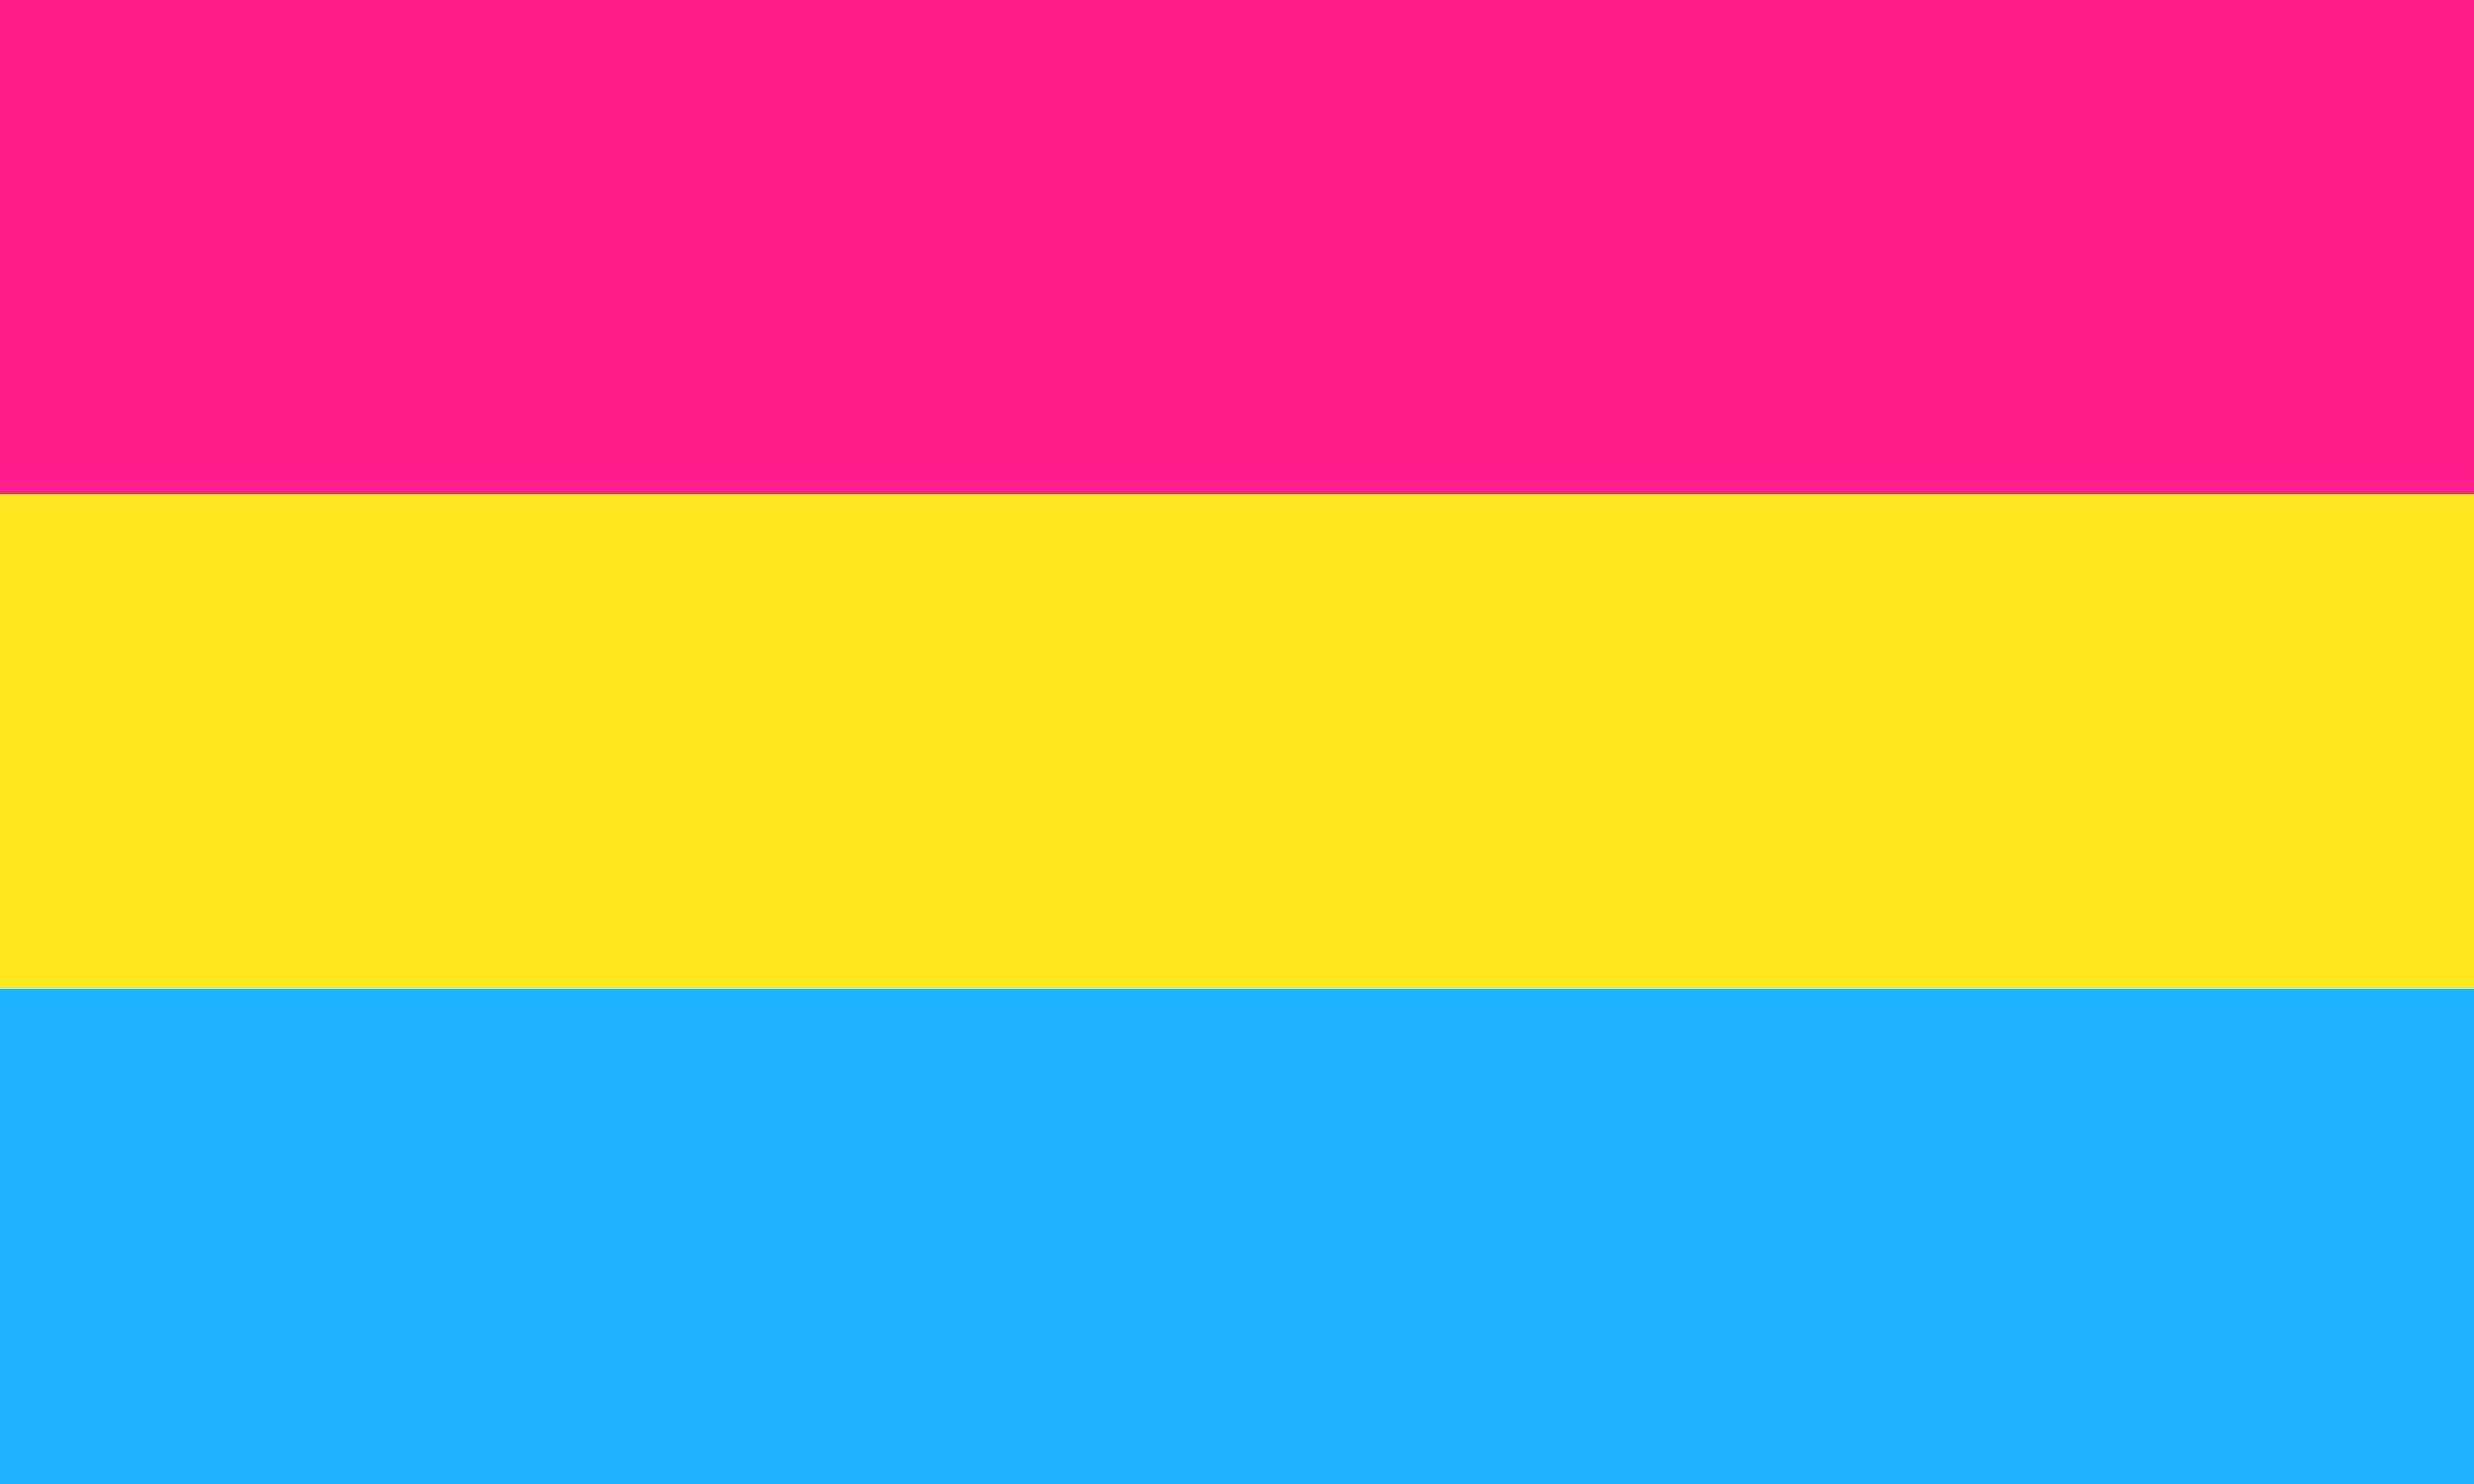 What's The Difference Between Bisexual And Pansexual